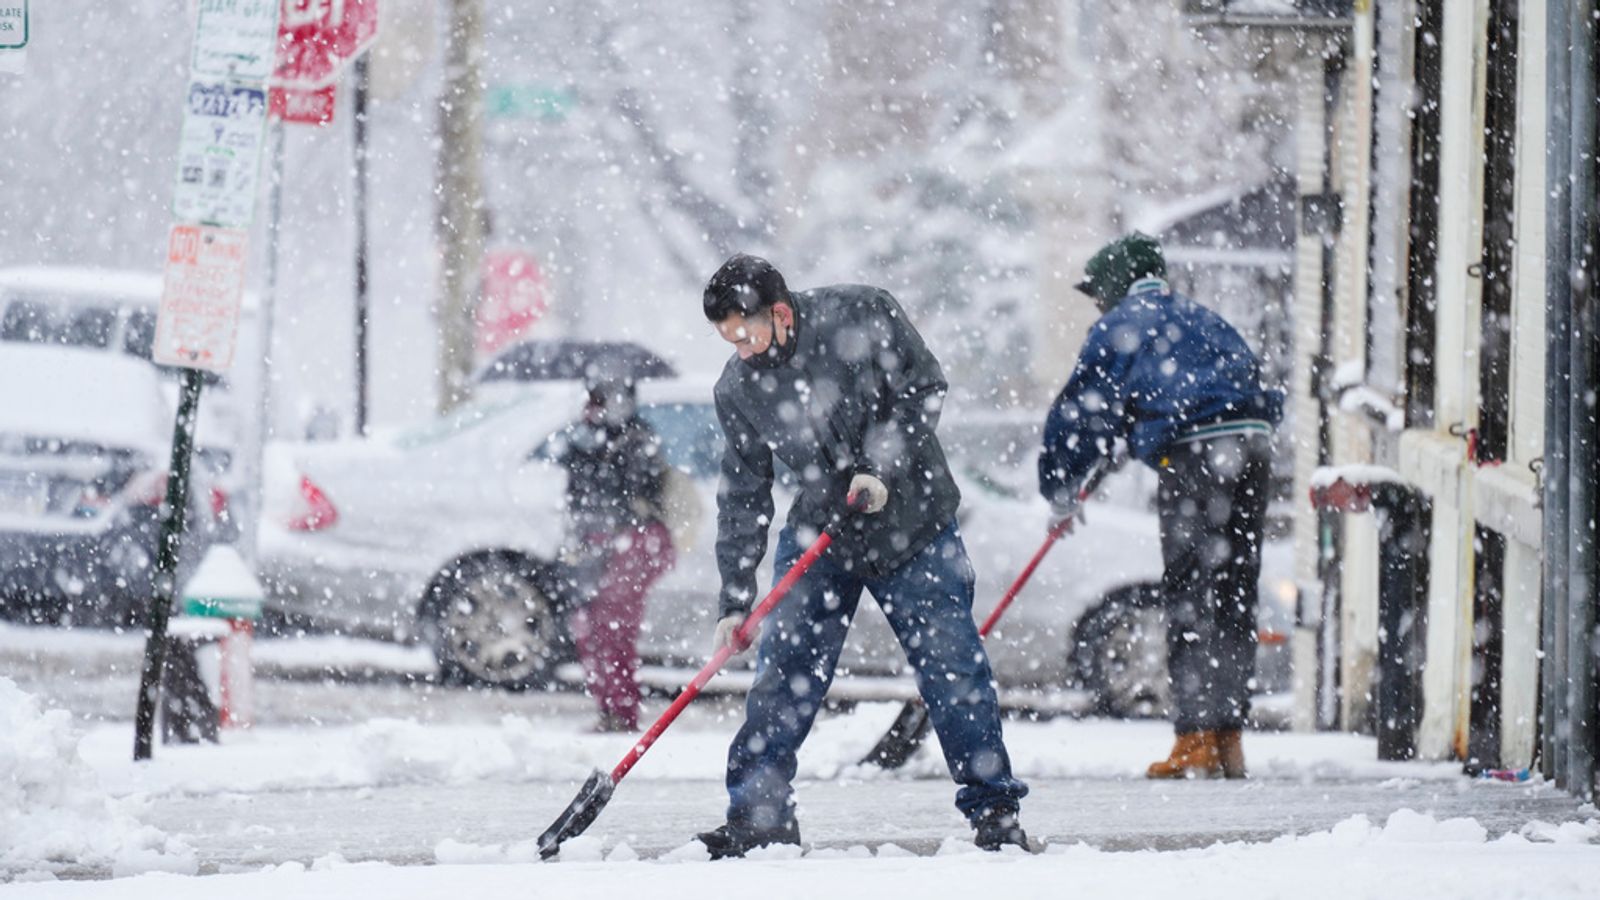 Storm Nor'easter: One dead as heavy snow and strong winds cause 'hazardous' conditions in US